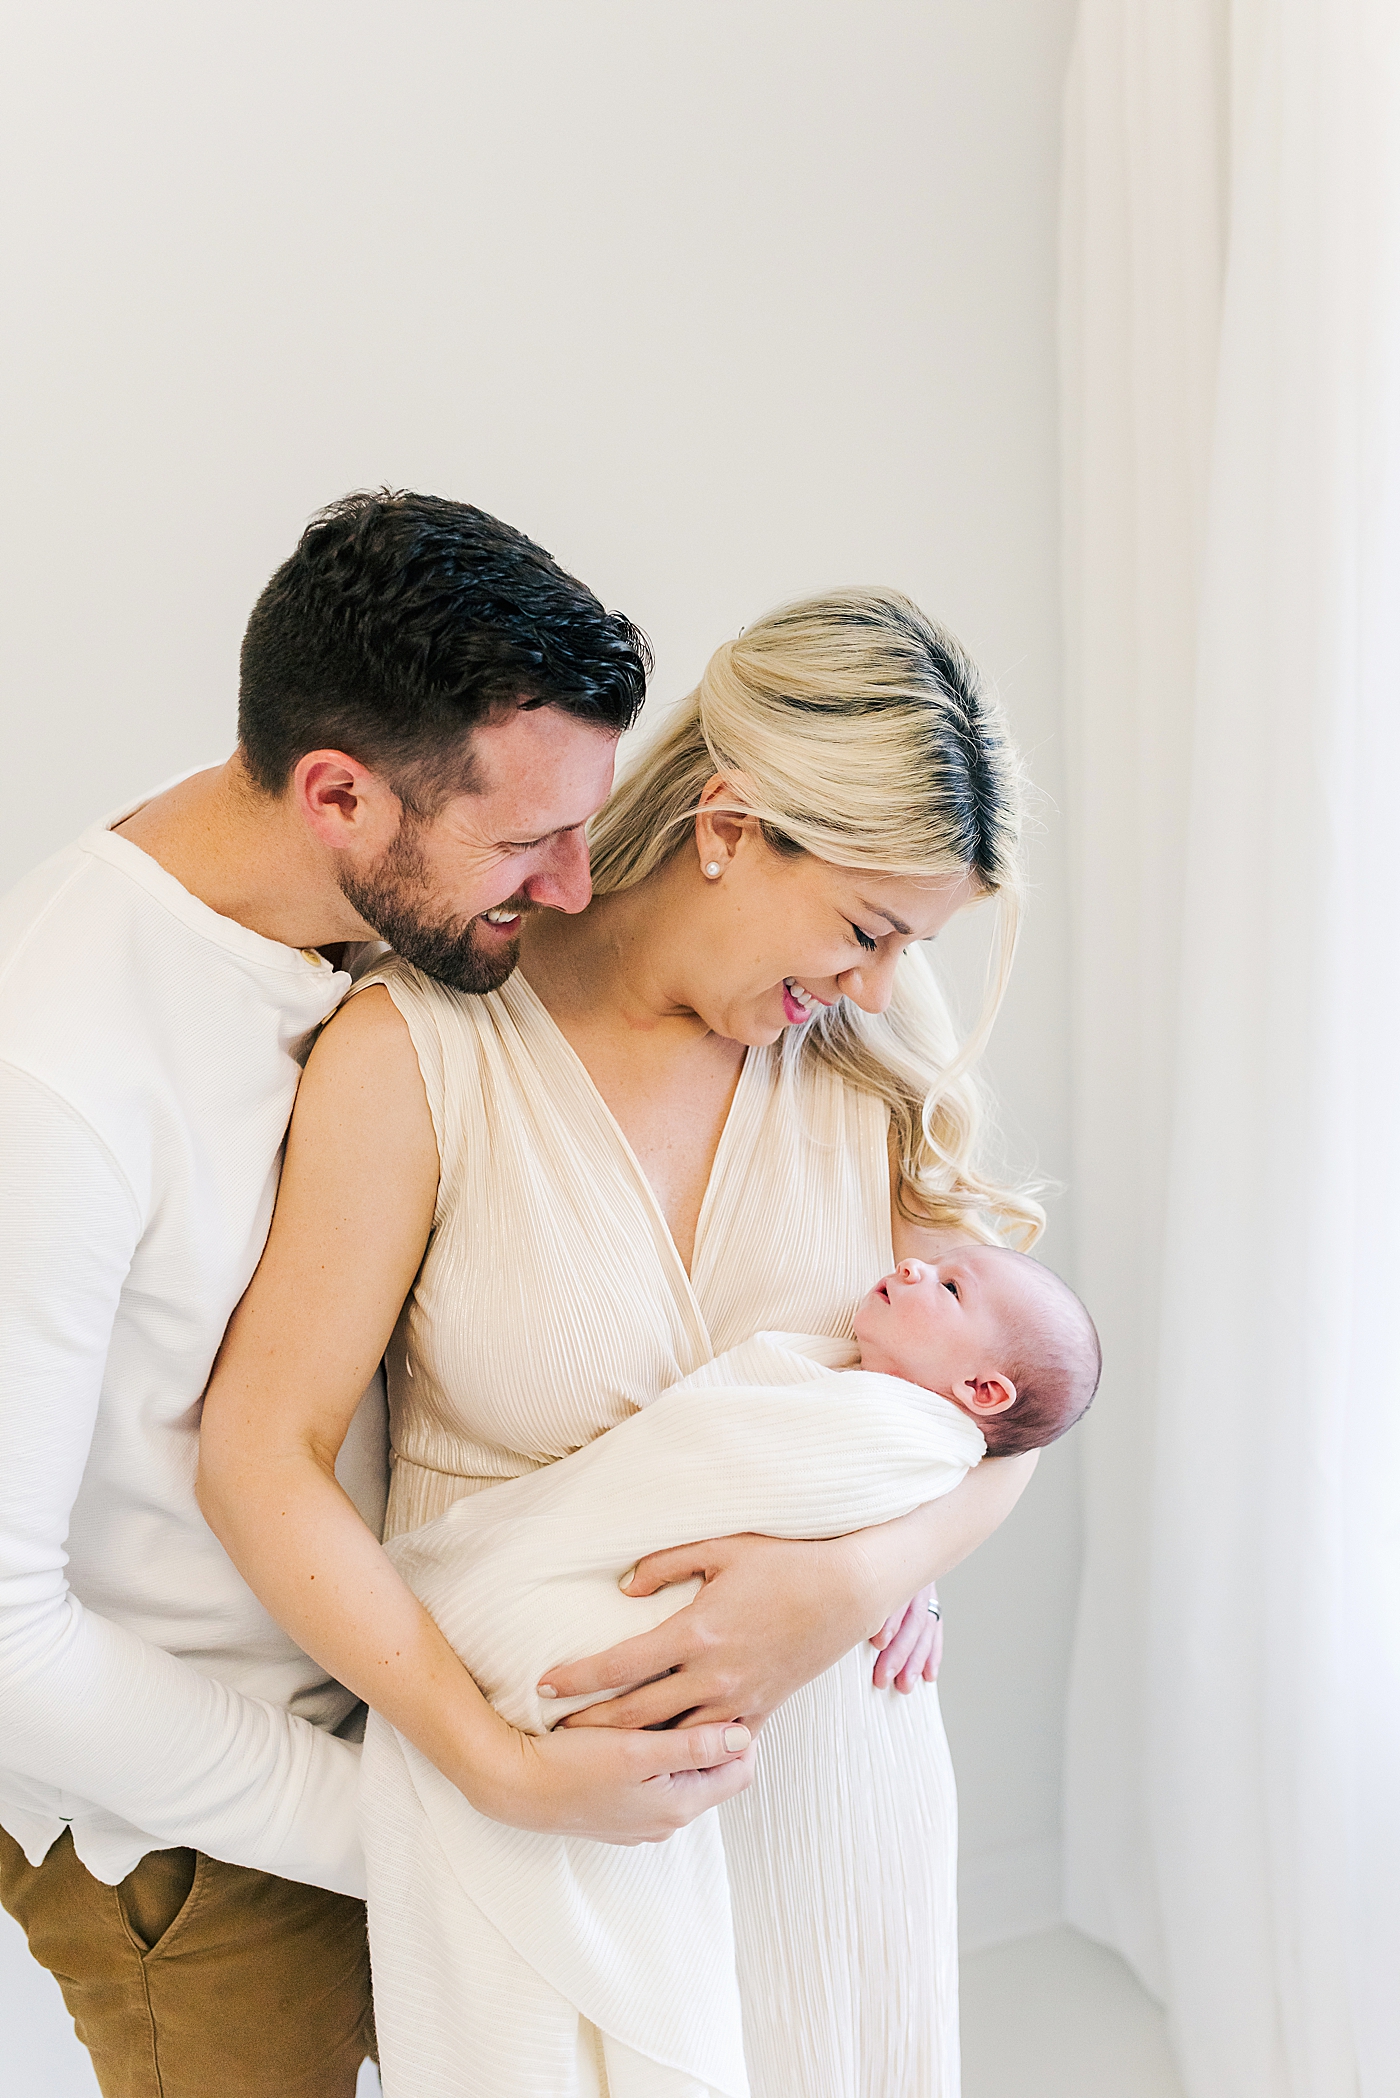 Mom and dad smiling at their new baby girl | Photo by Ballantyne newborn photographer Anna Wisjo 